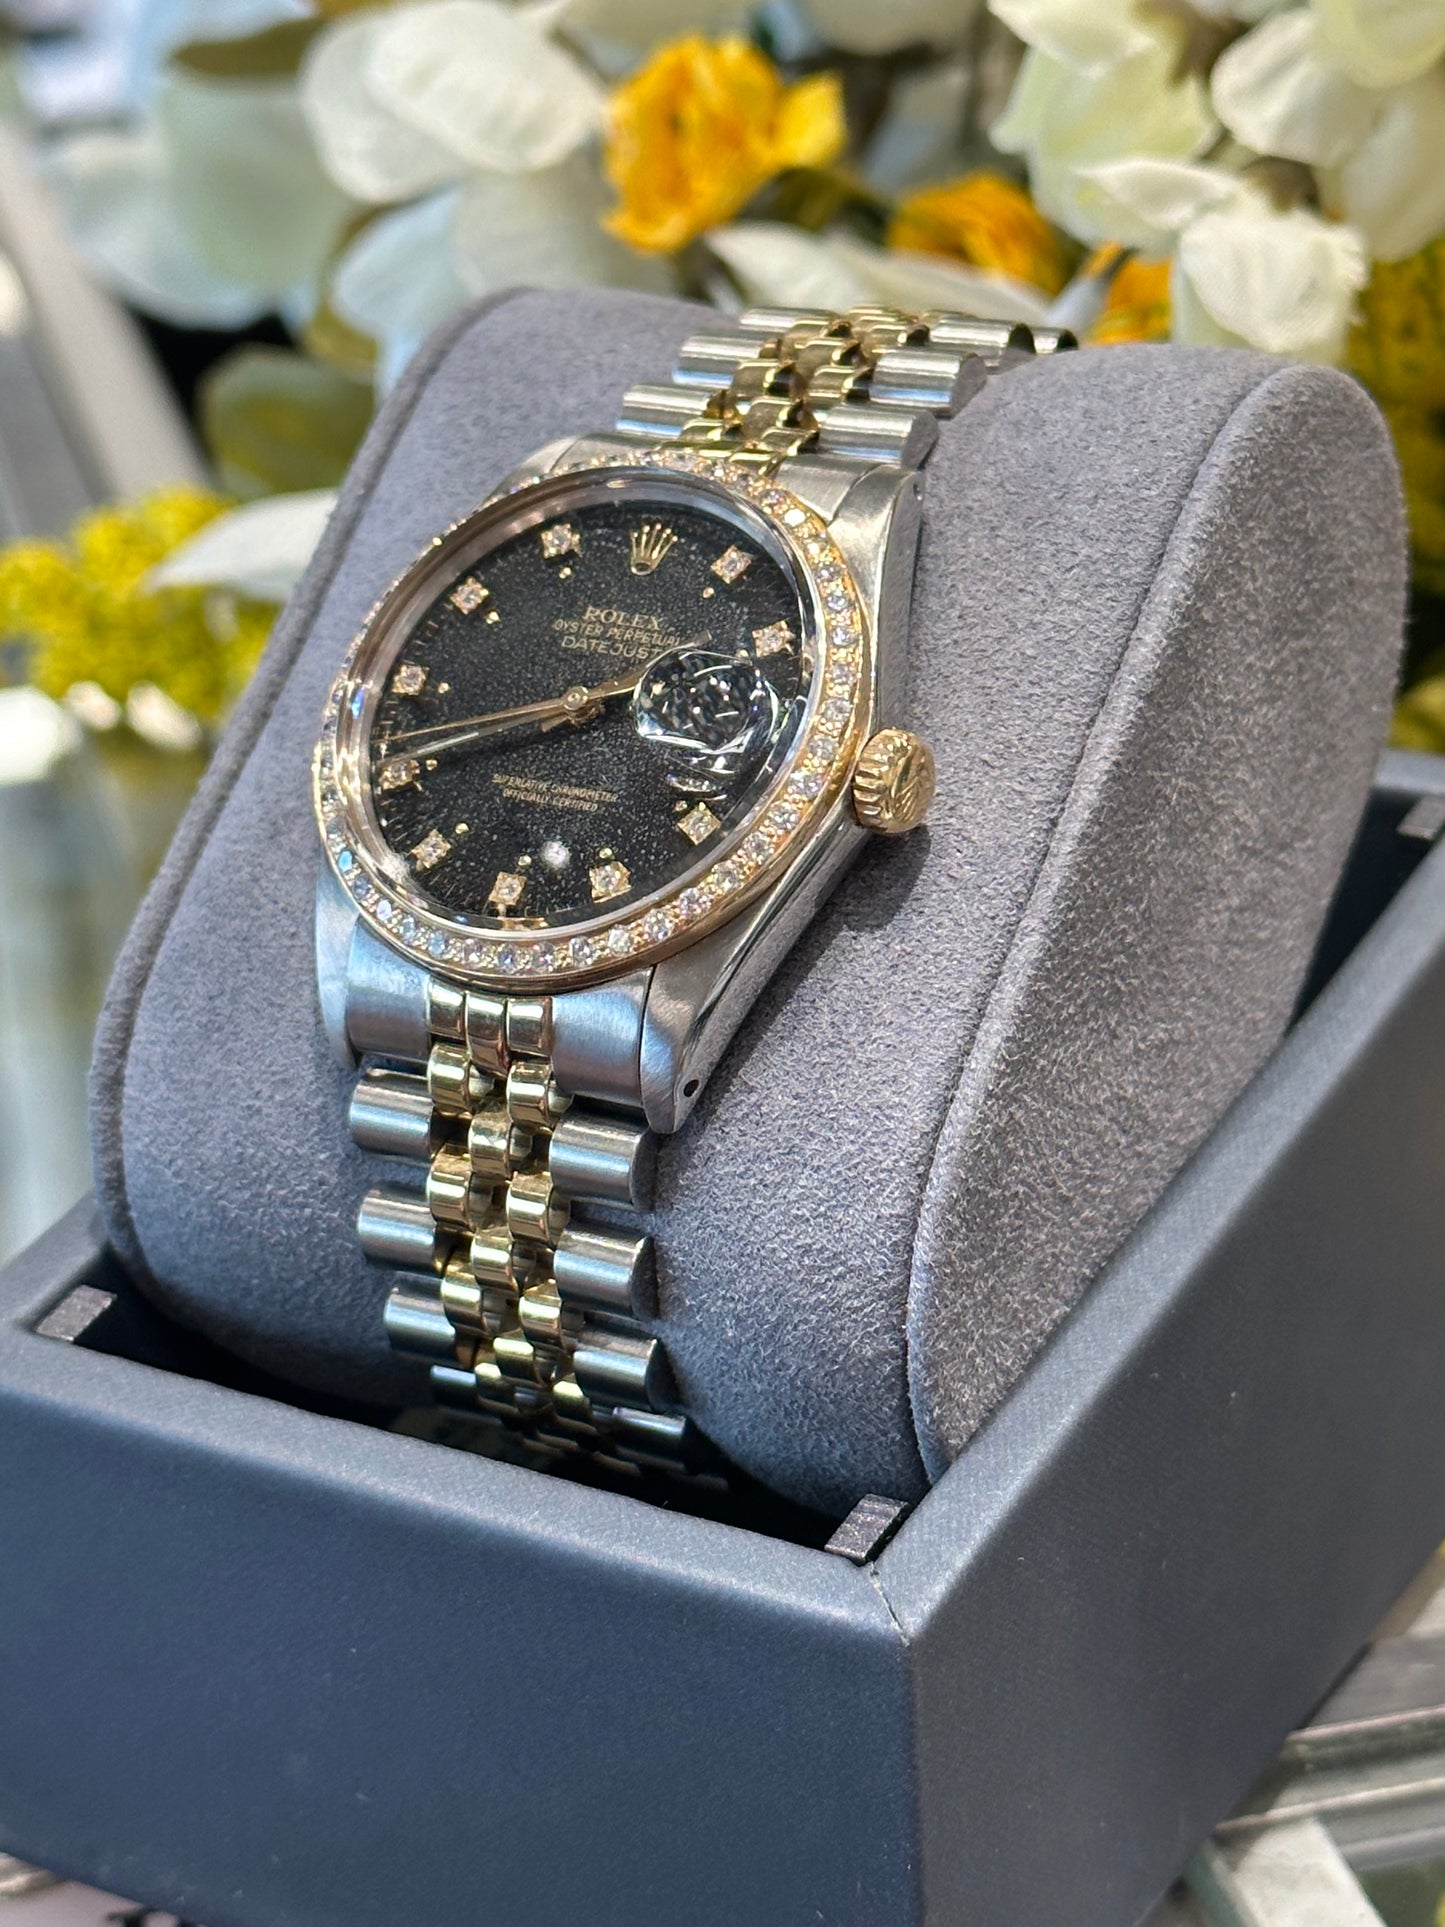 Oyster Perpetual Datejust